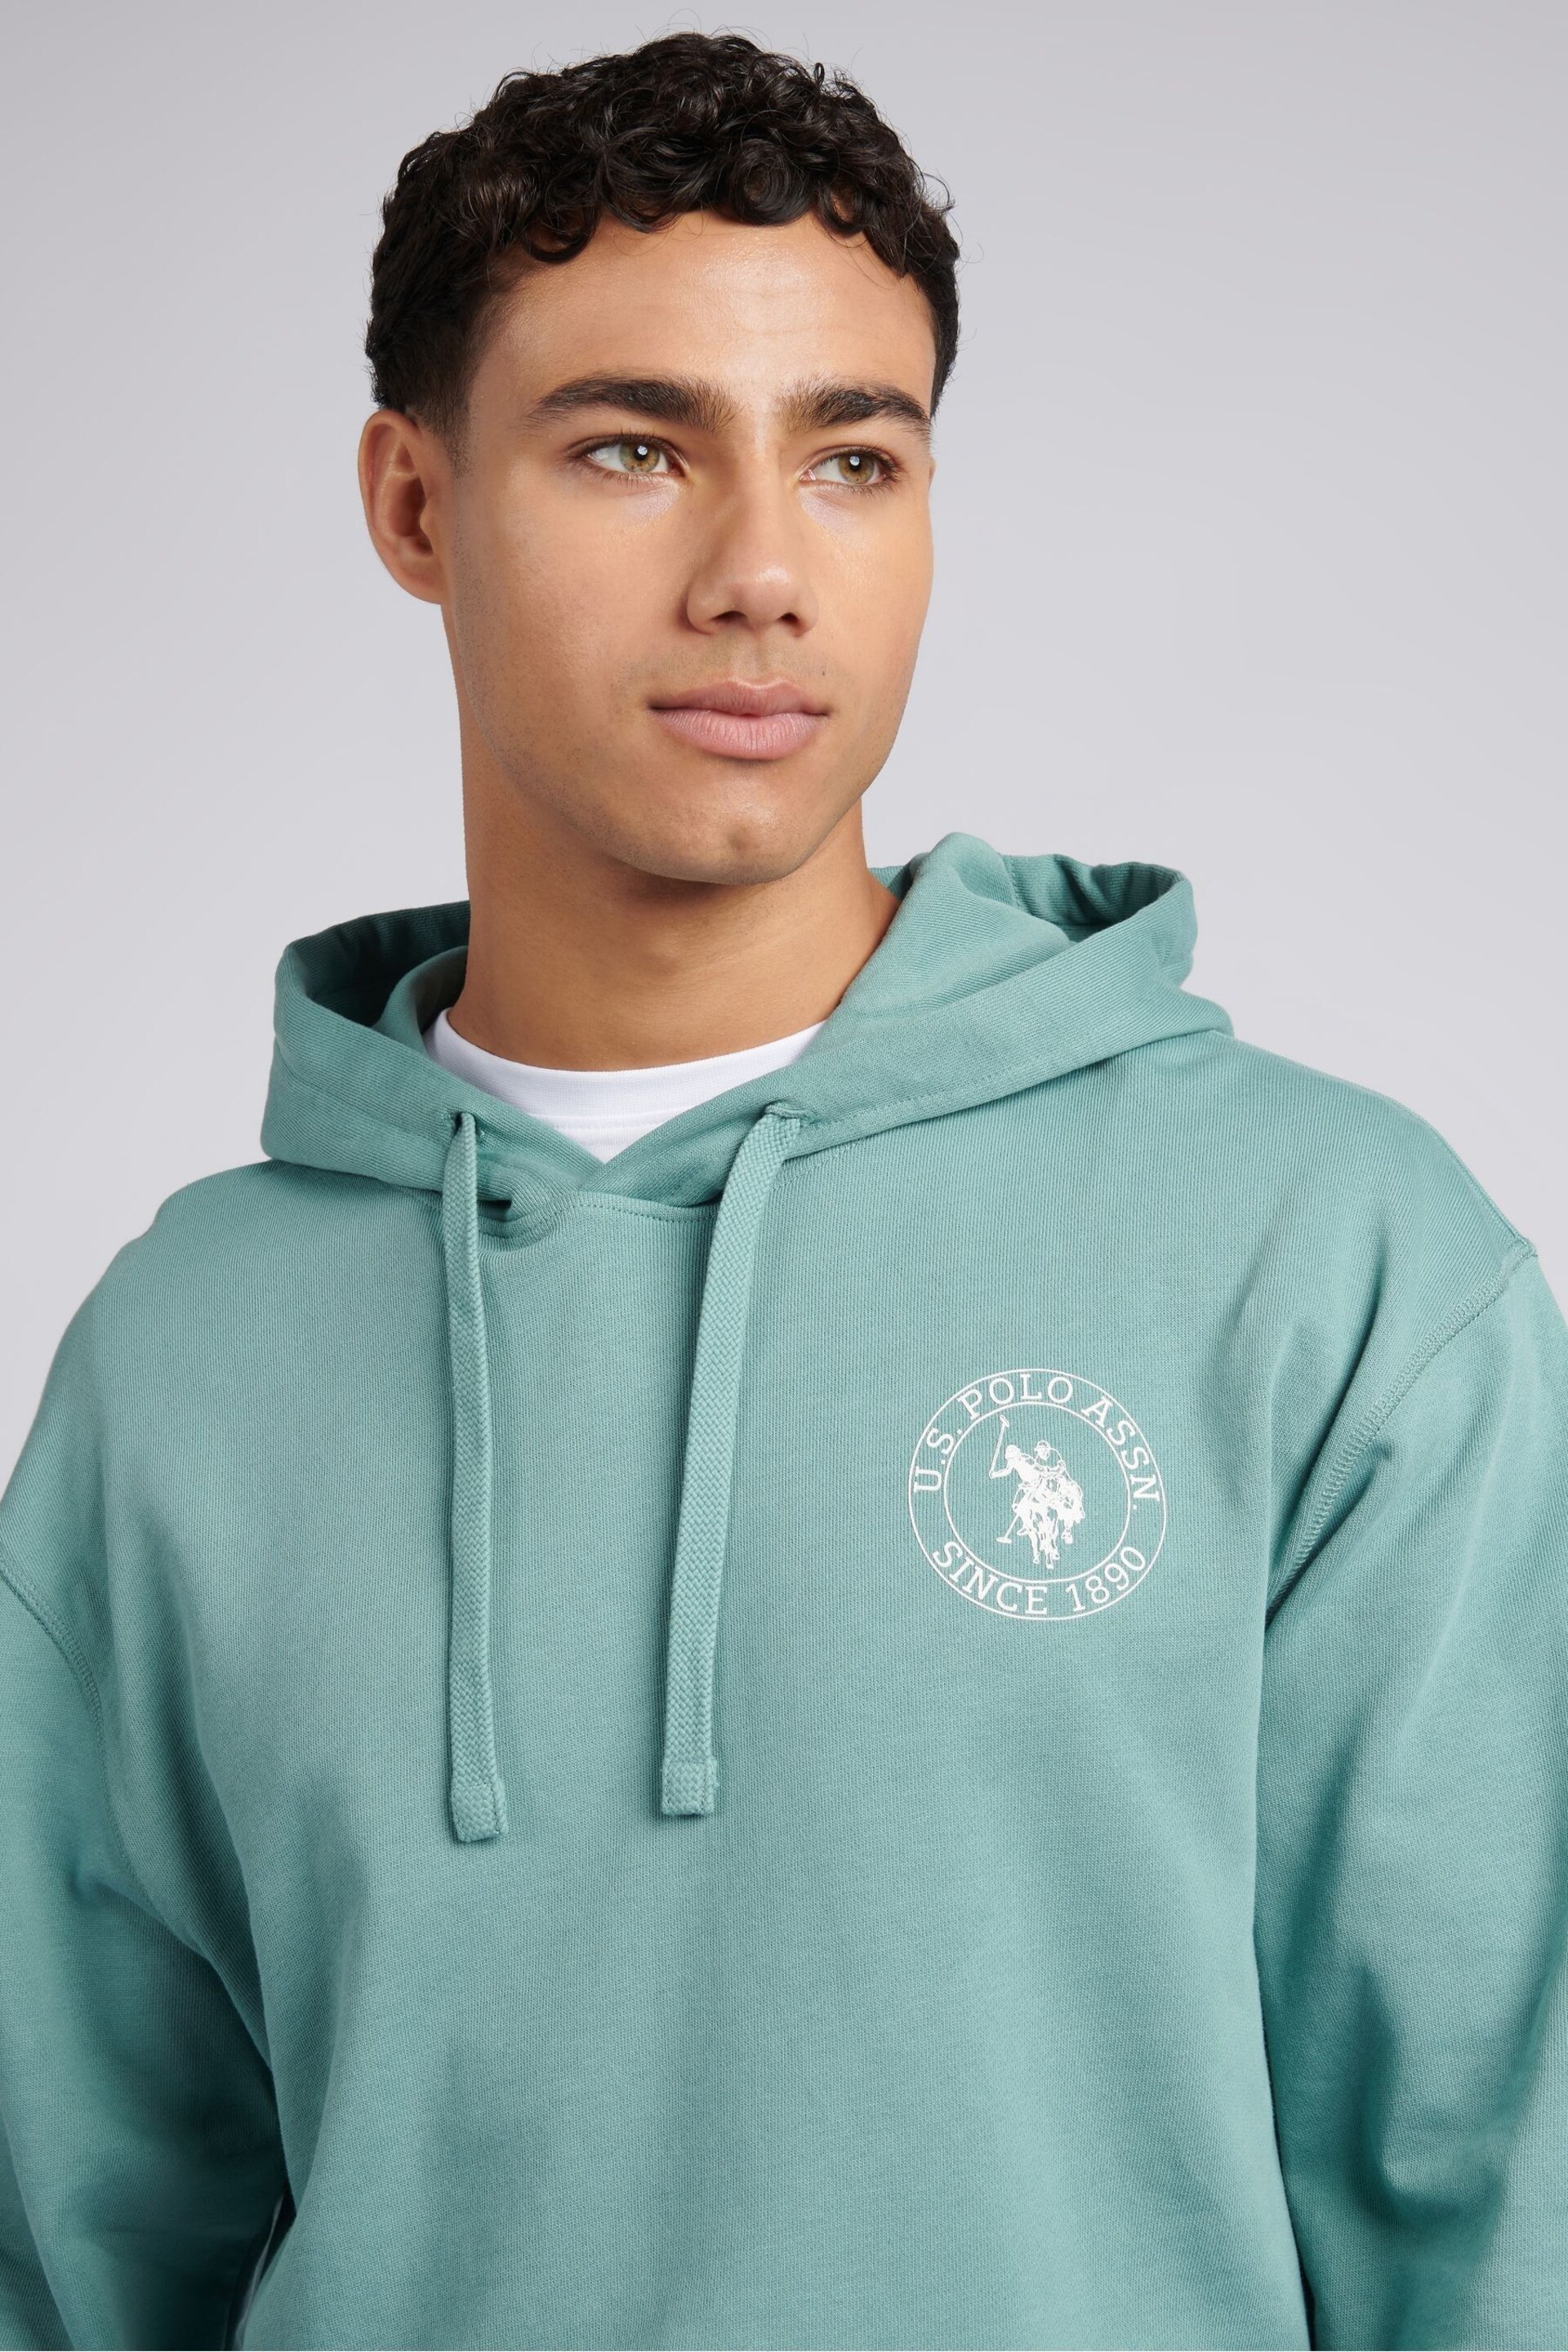 U.S. Polo Assn. Mens Blue Classic Fit Circle Print Hoodie - Image 2 of 4